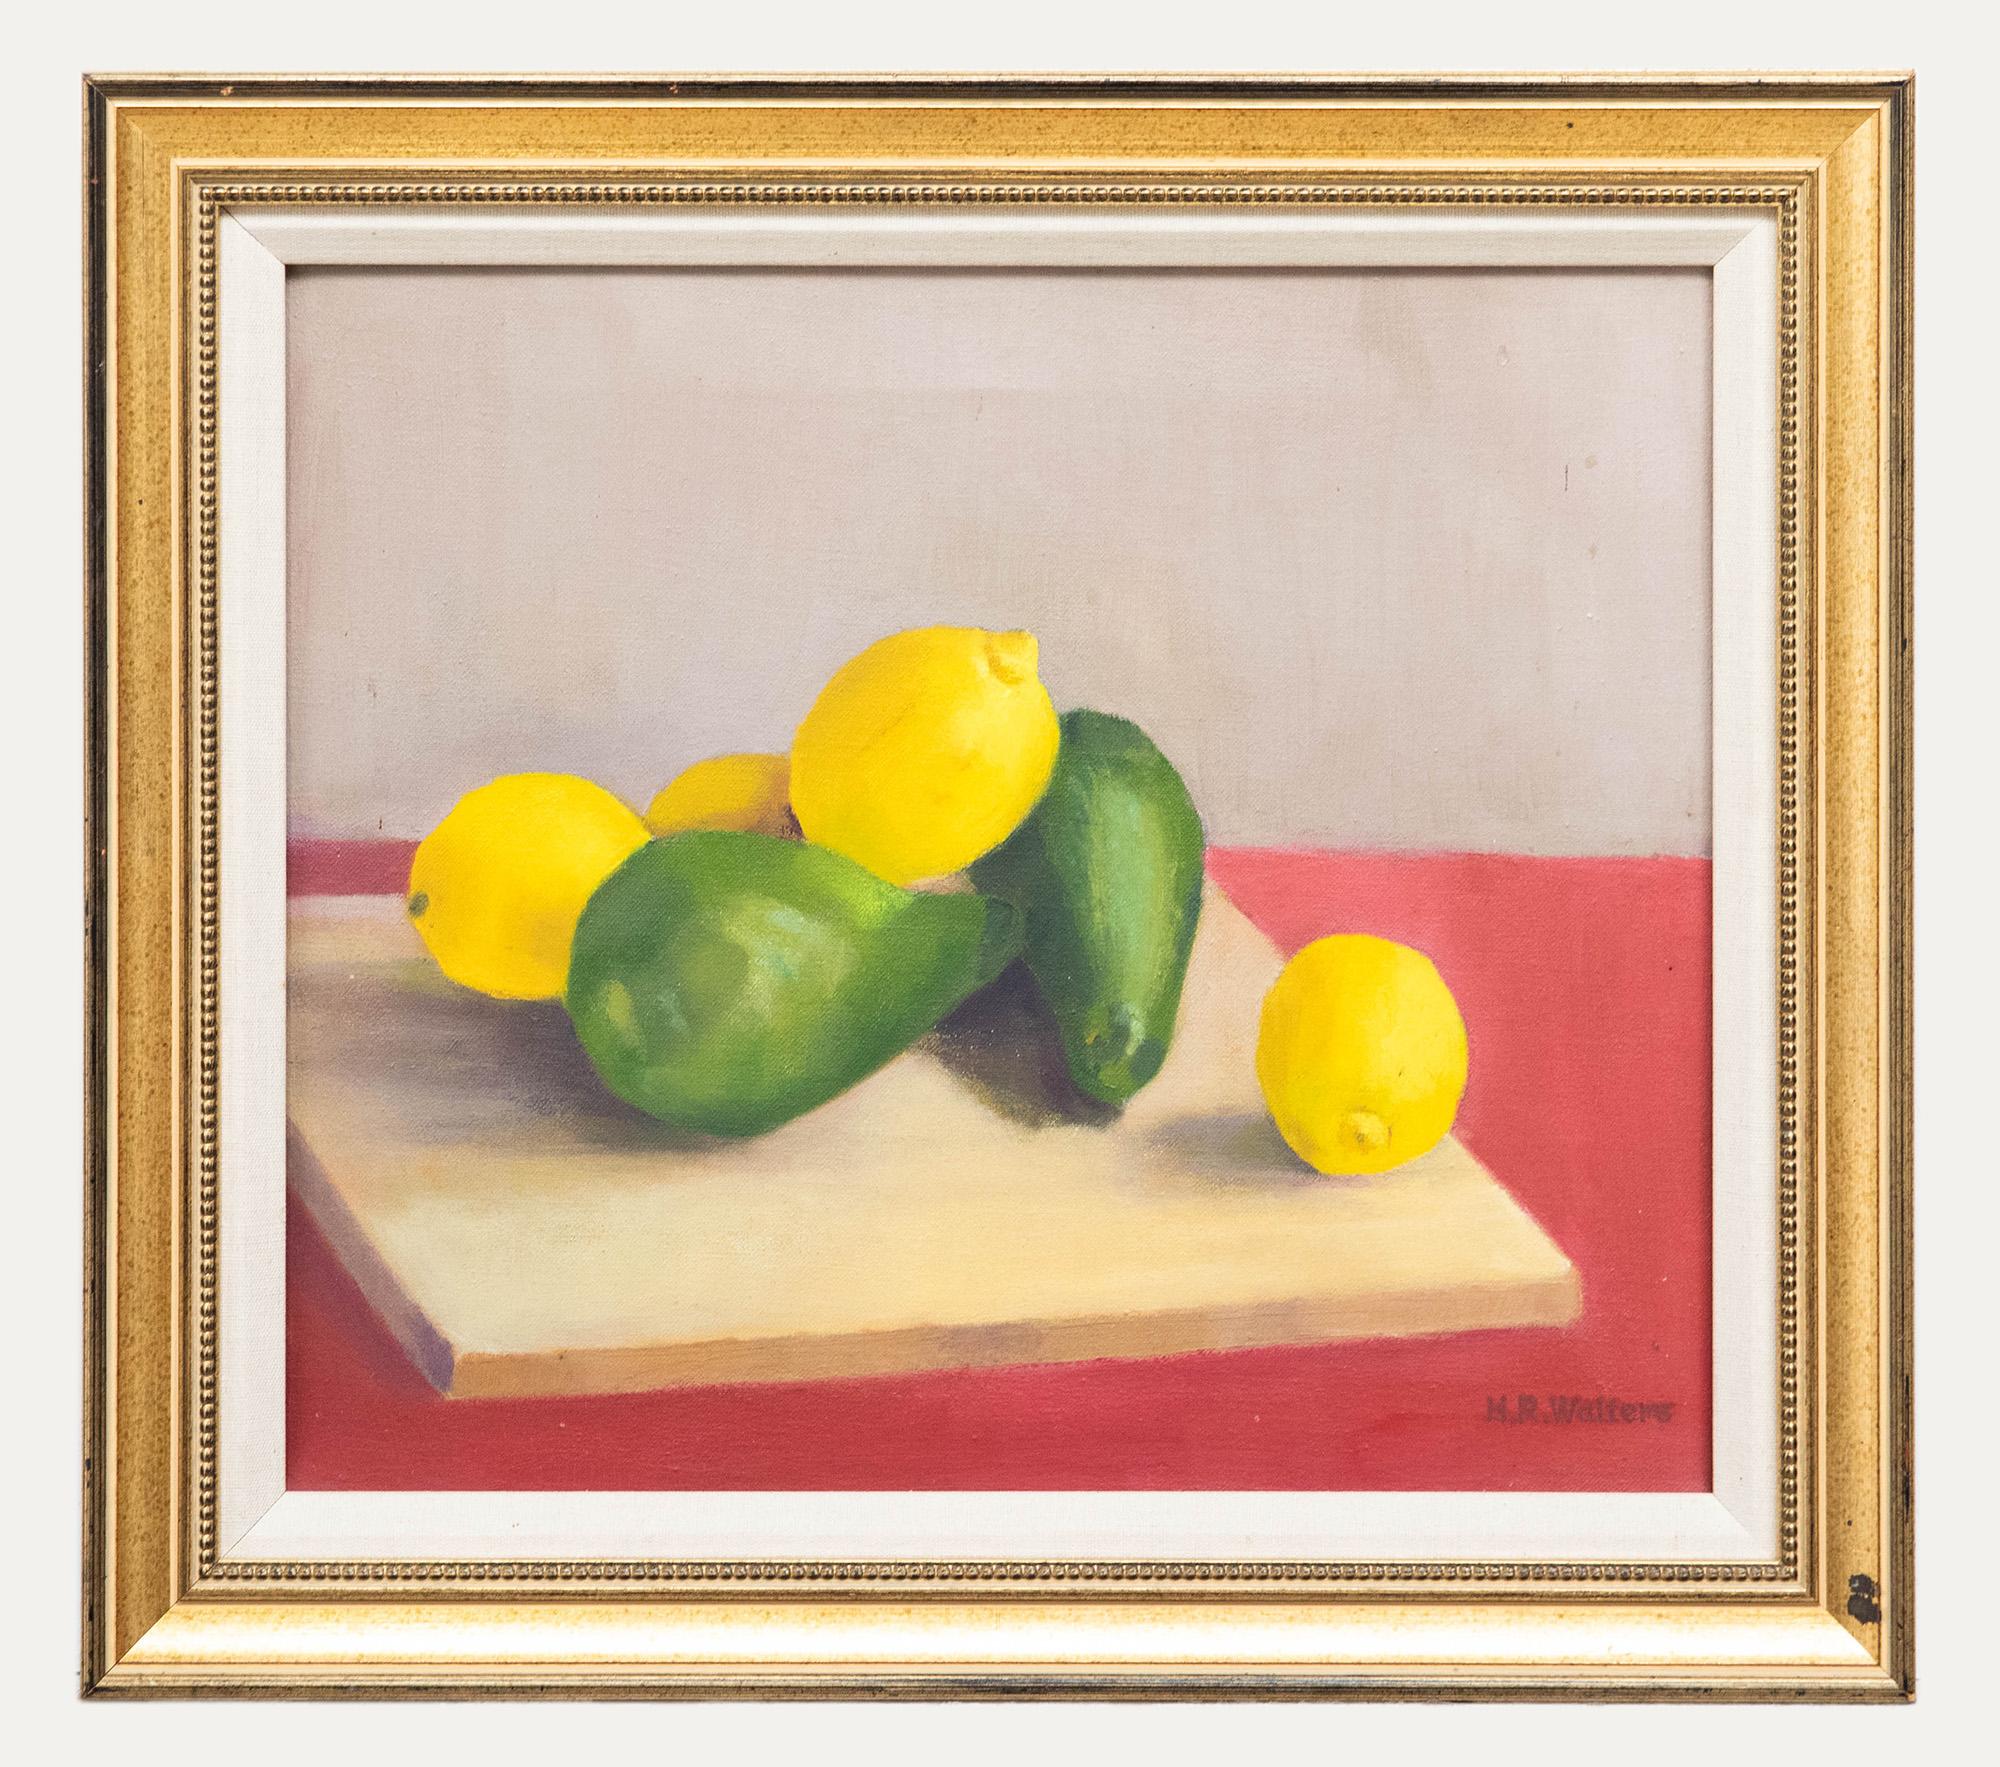 Unknown Still-Life Painting - H. R. Walters - Framed Mid 20th Century Oil, Lemons & Pears